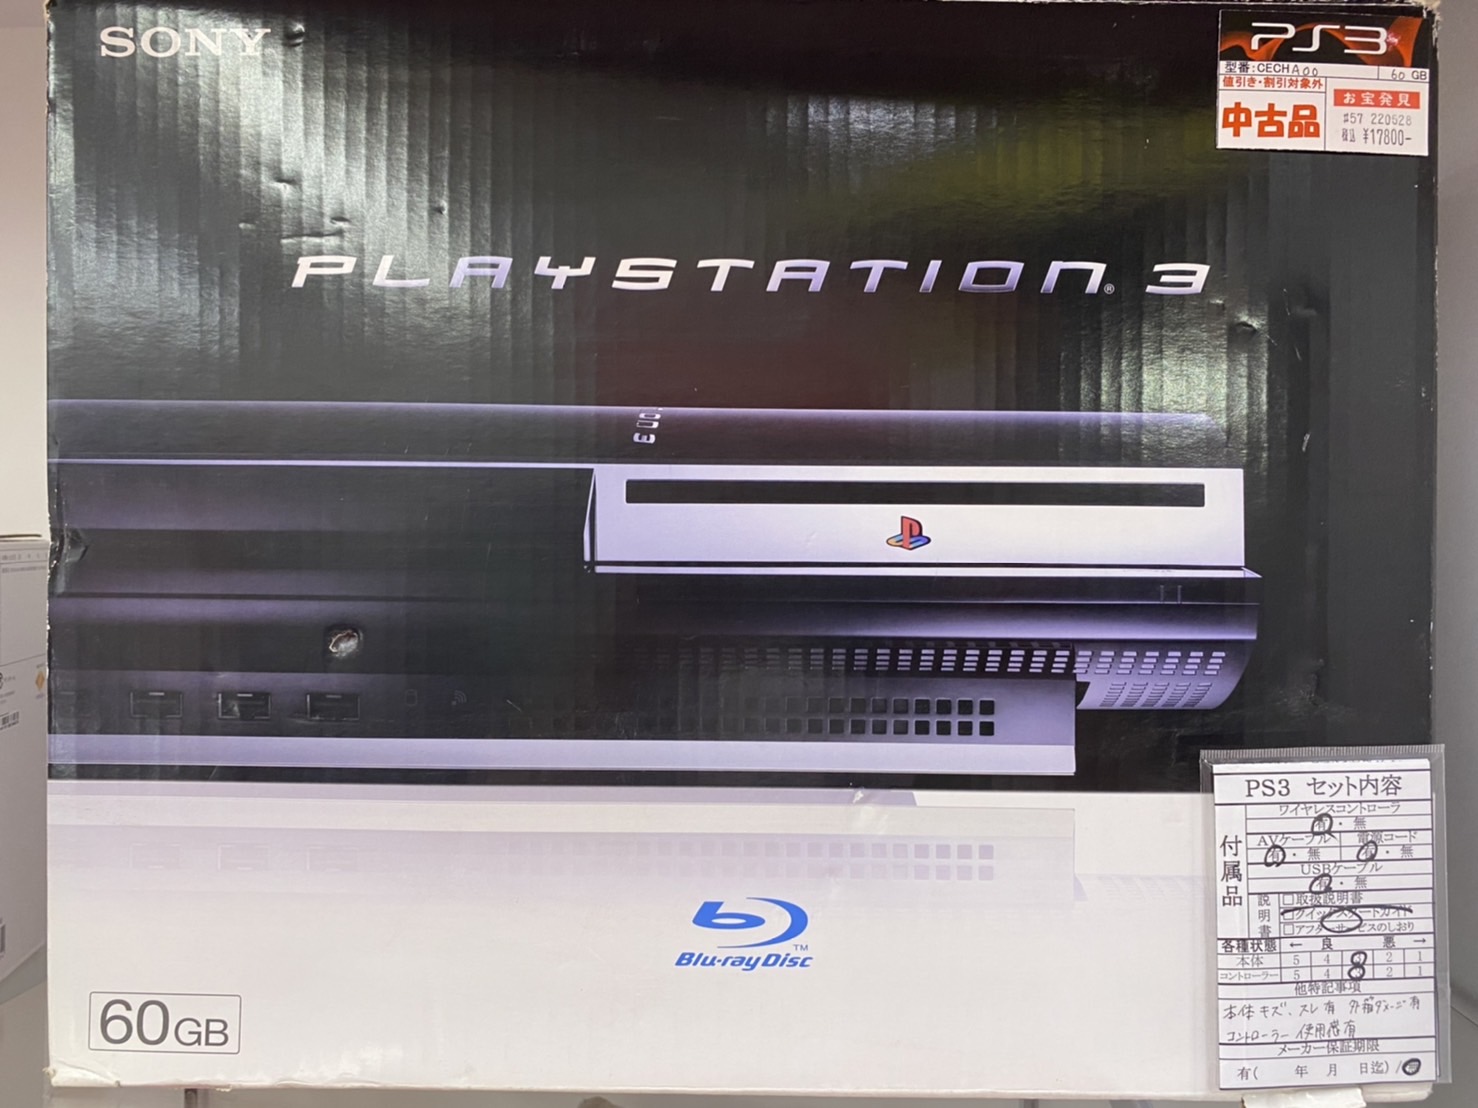 ☆〈PS3 初期型〉あります！ #ゲーム #佐賀 #武雄 #マンガ倉庫 #ps3